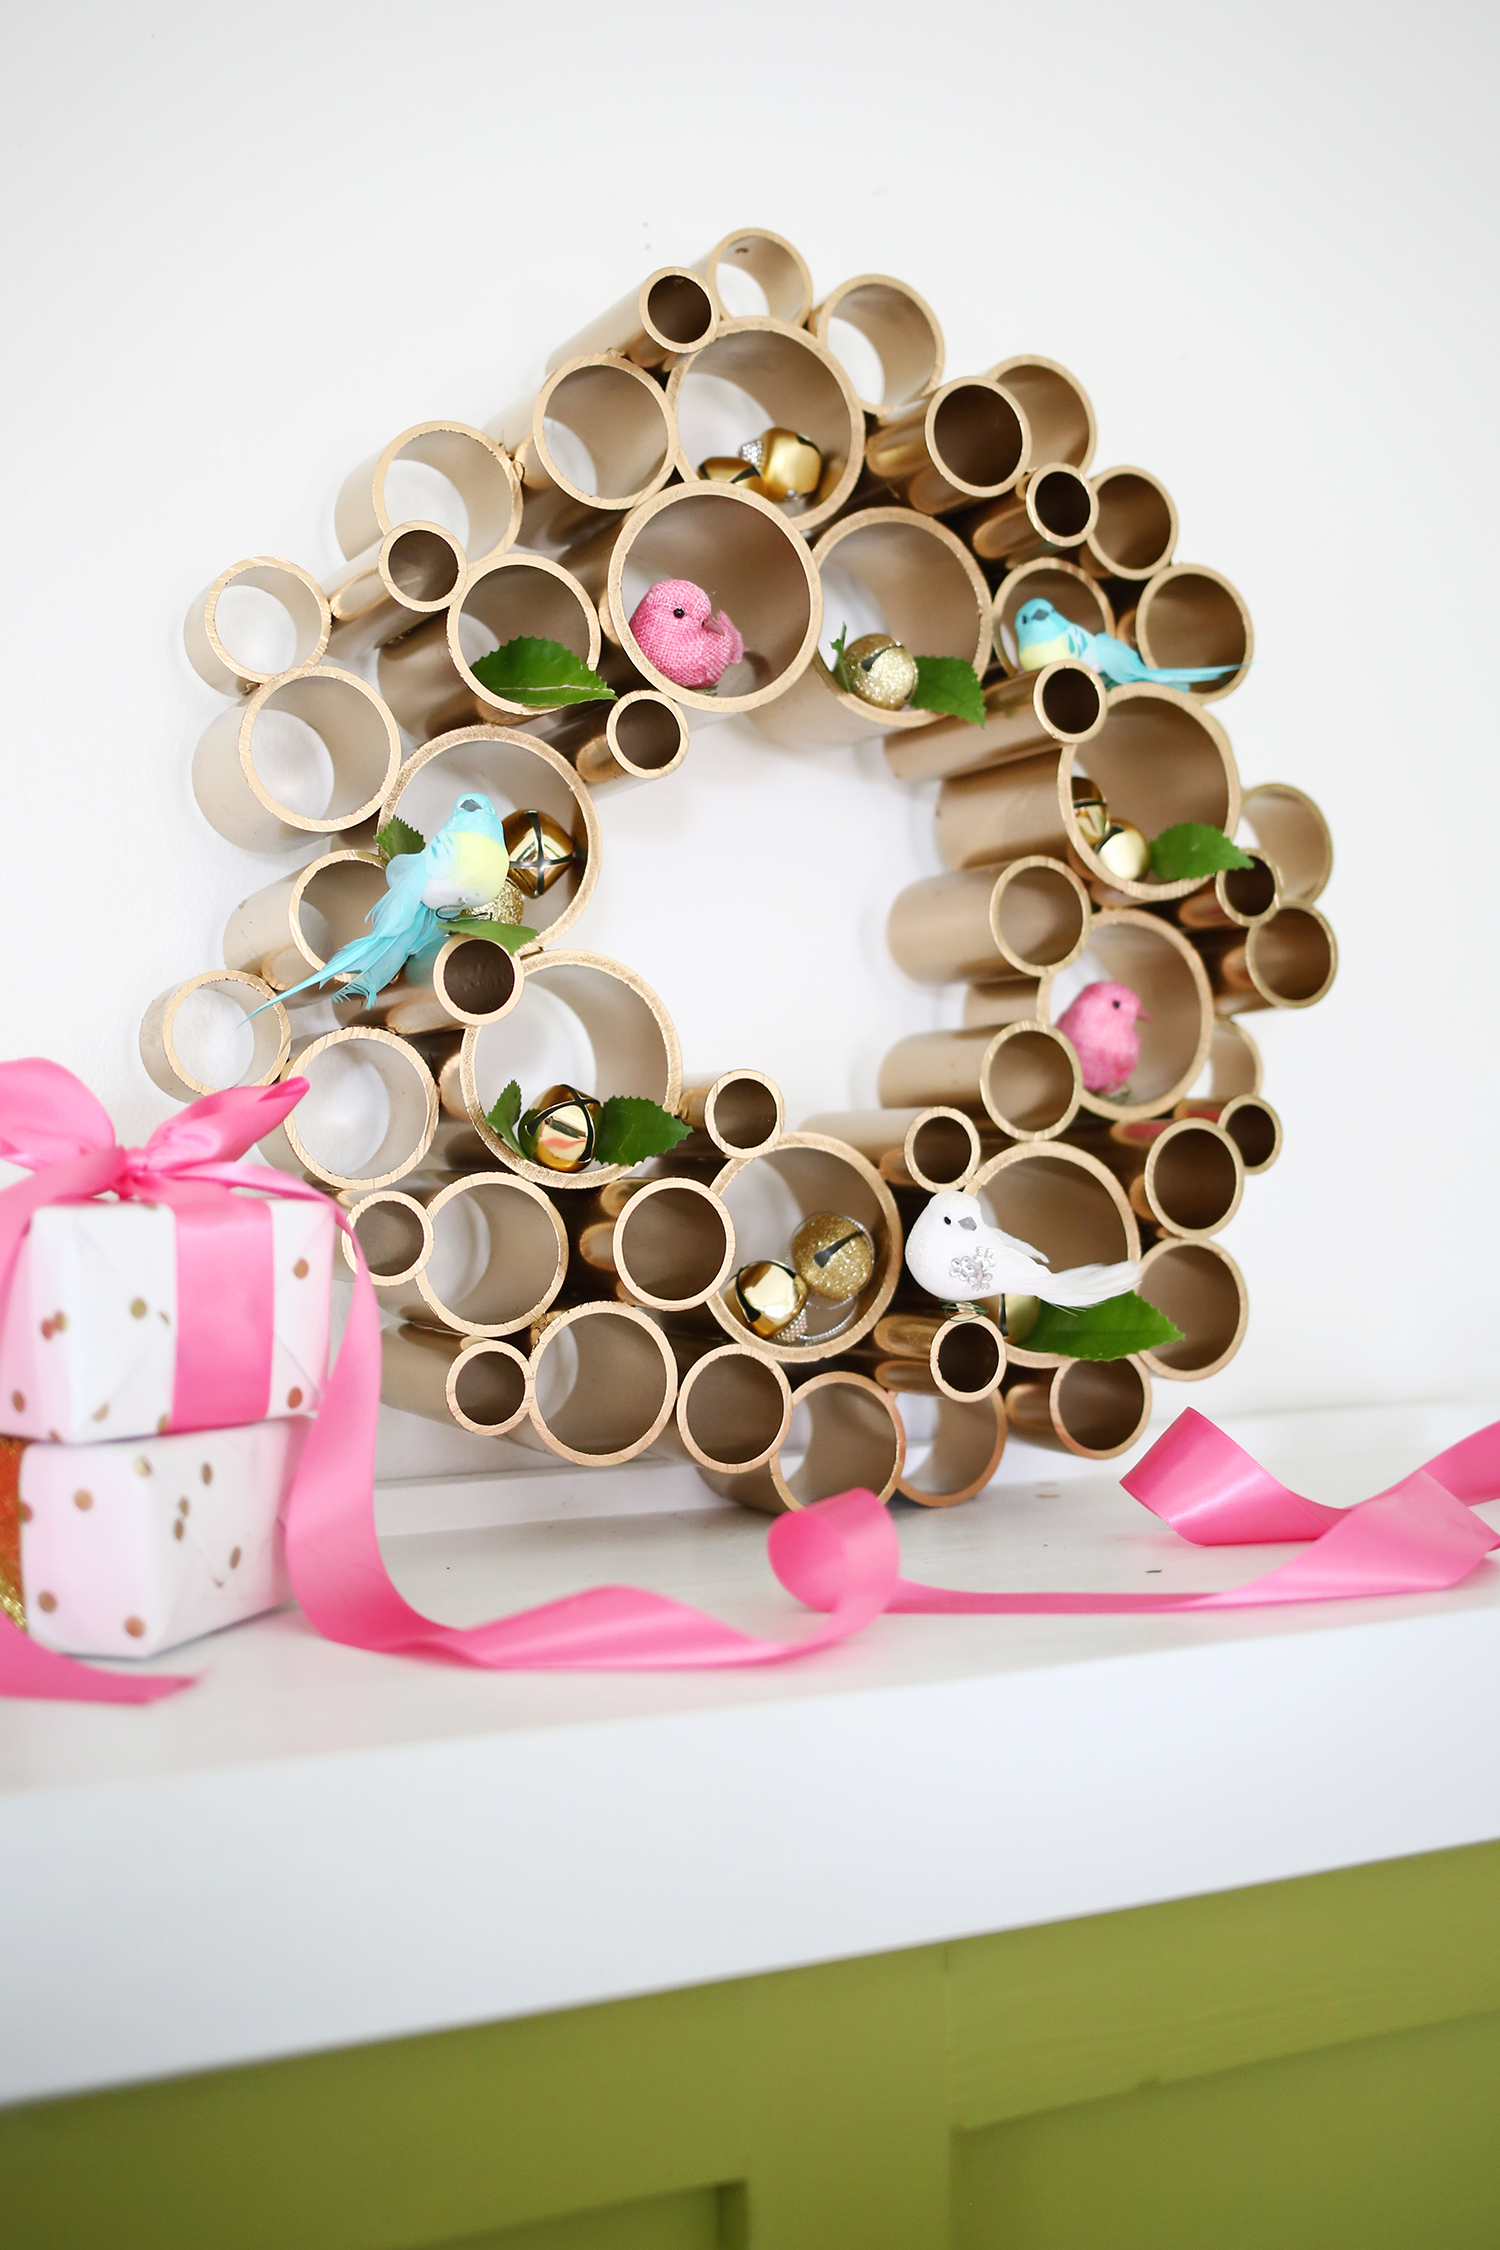 DIY PVC pipe wreath for any holiday